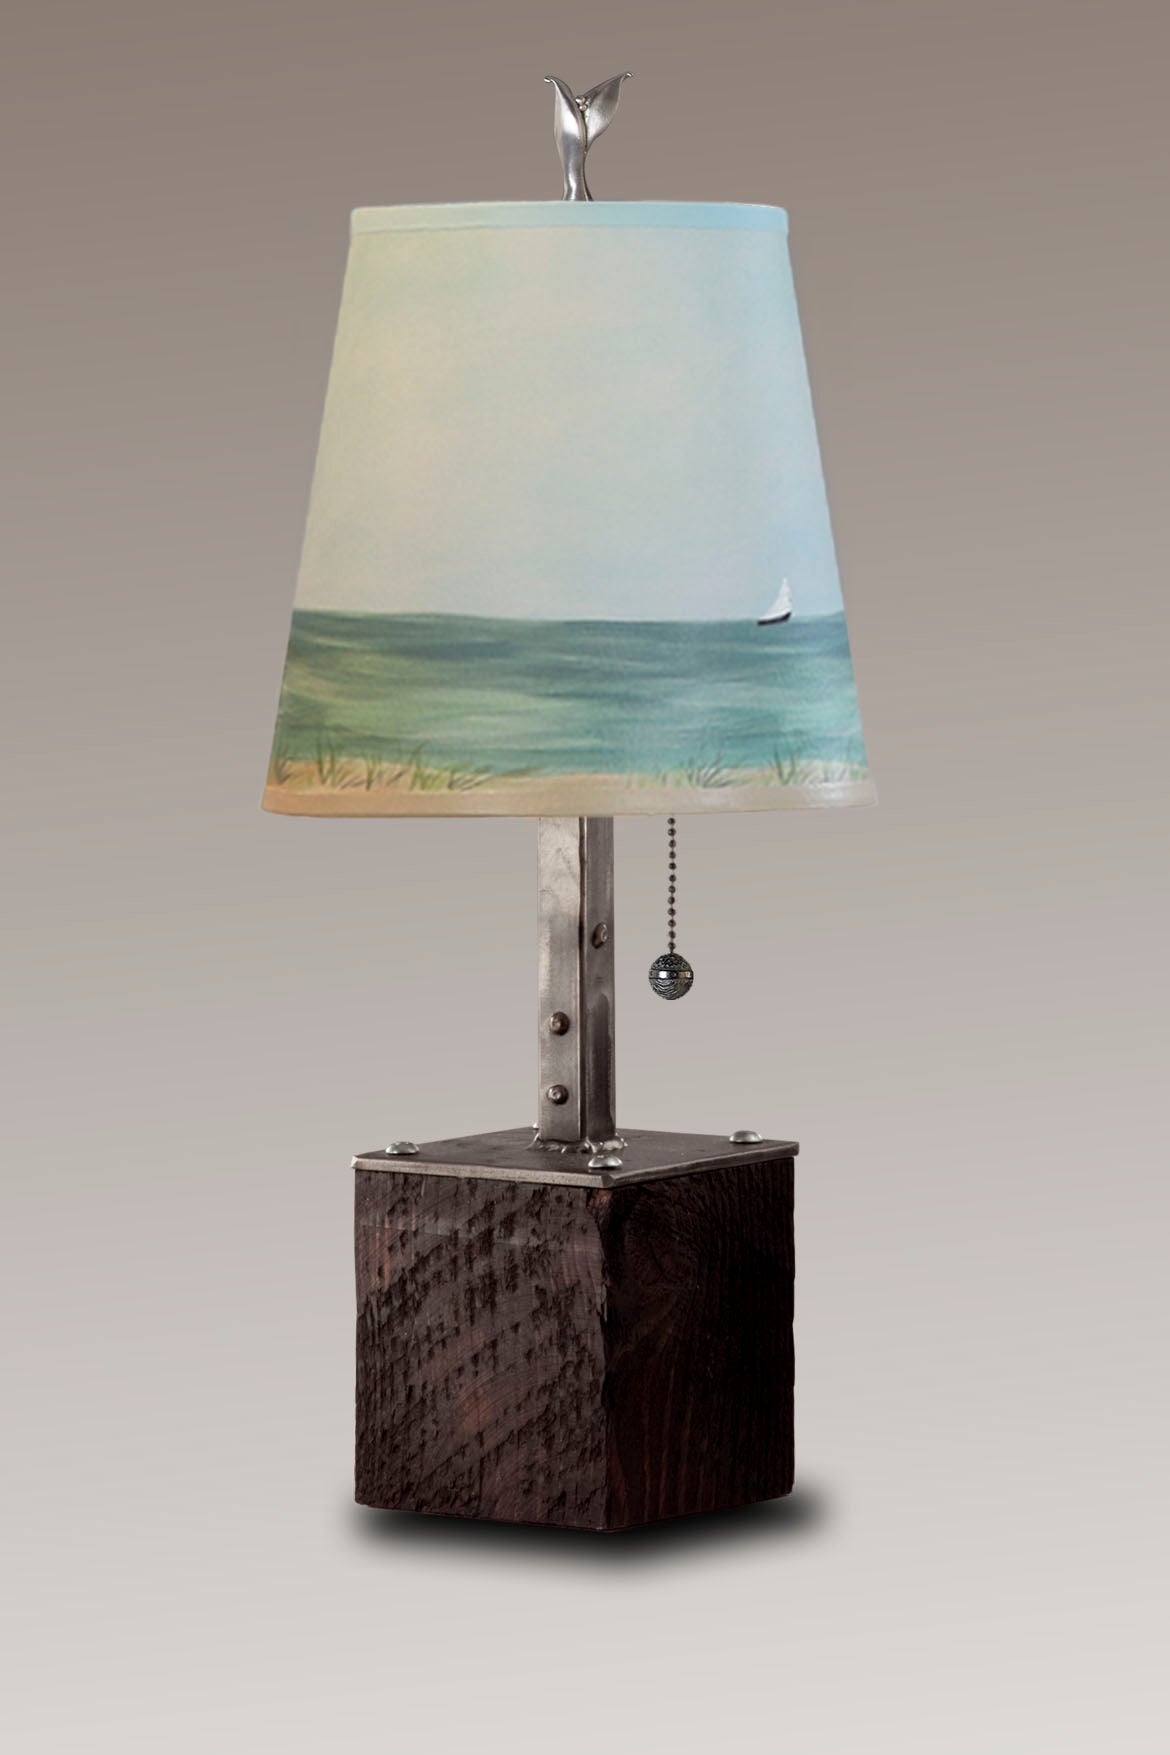 Janna Ugone & Co Table Lamps Steel Table Lamp on Reclaimed Wood with Small Drum Shade in Shore